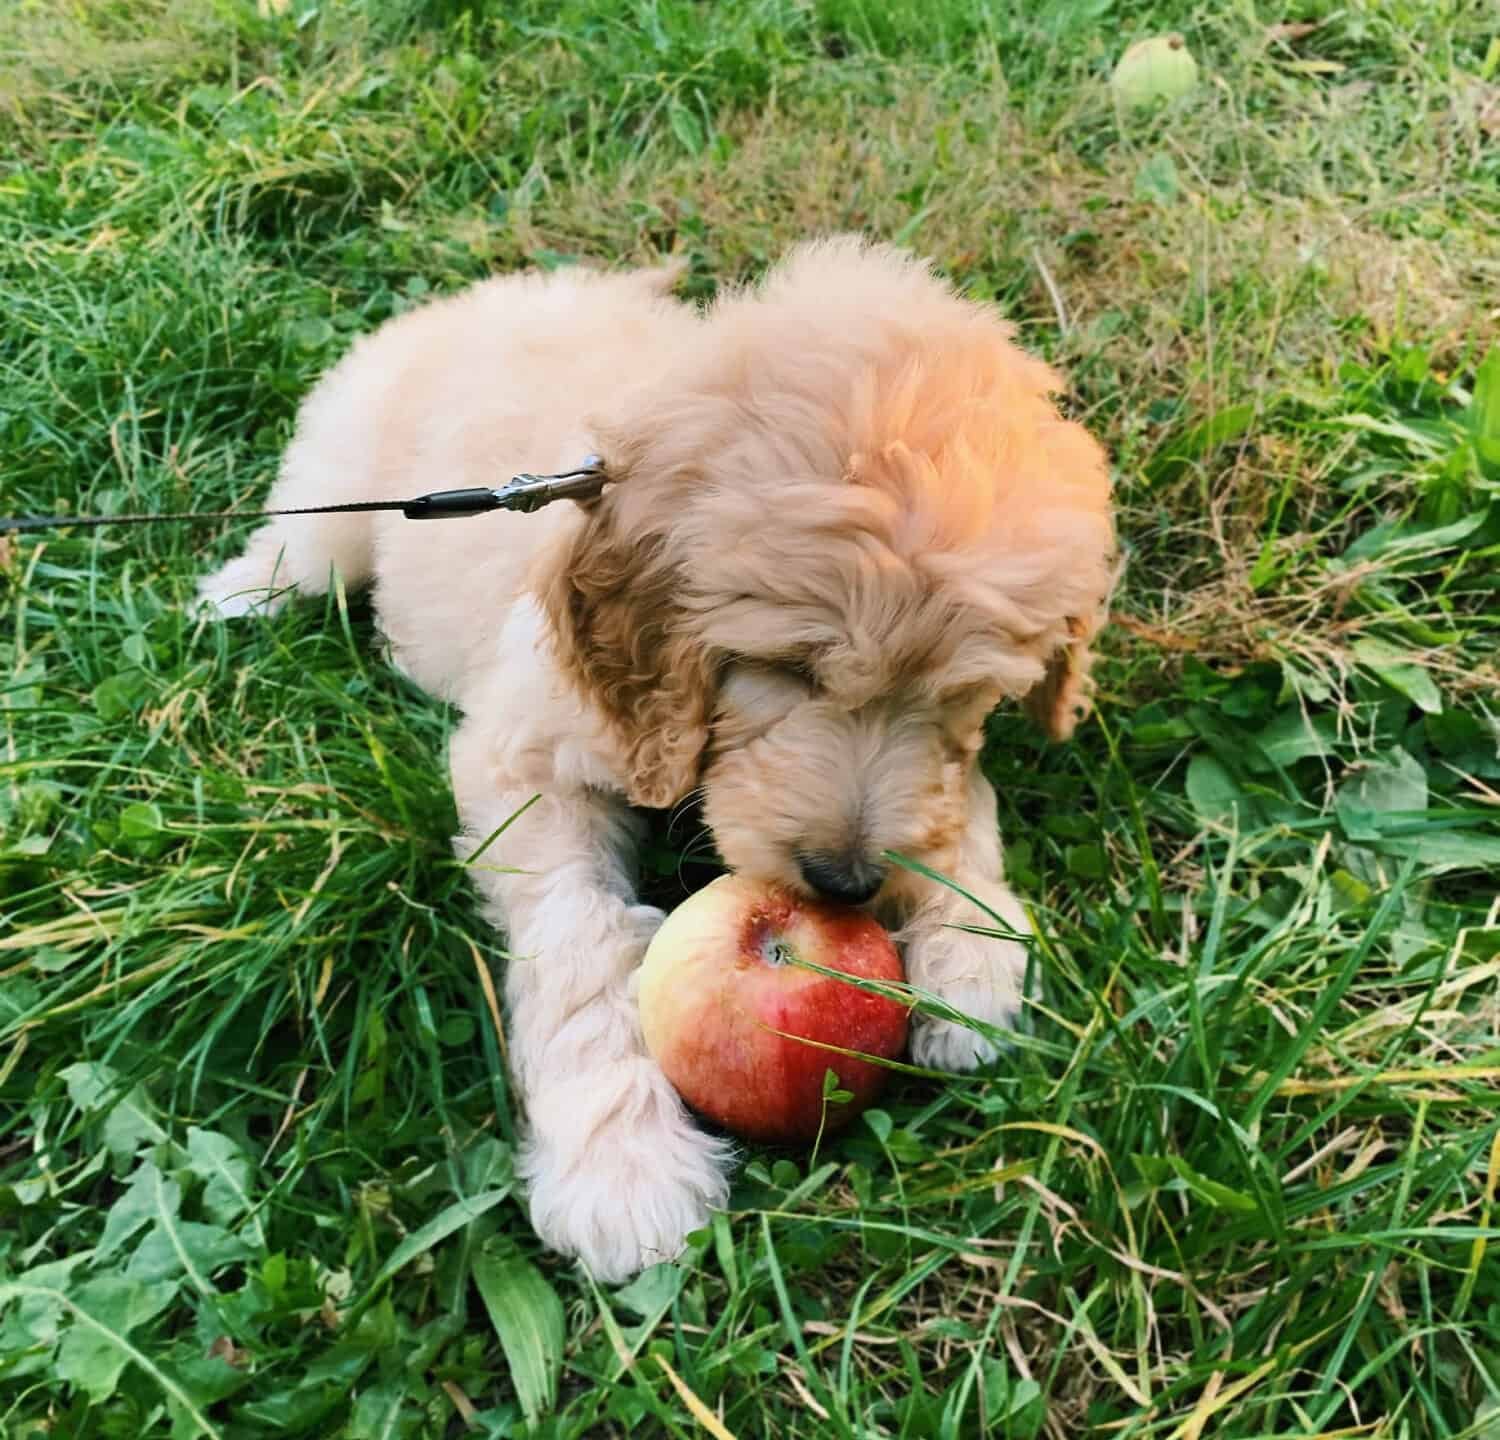 goldendoodle puppy eating an apple for the first time